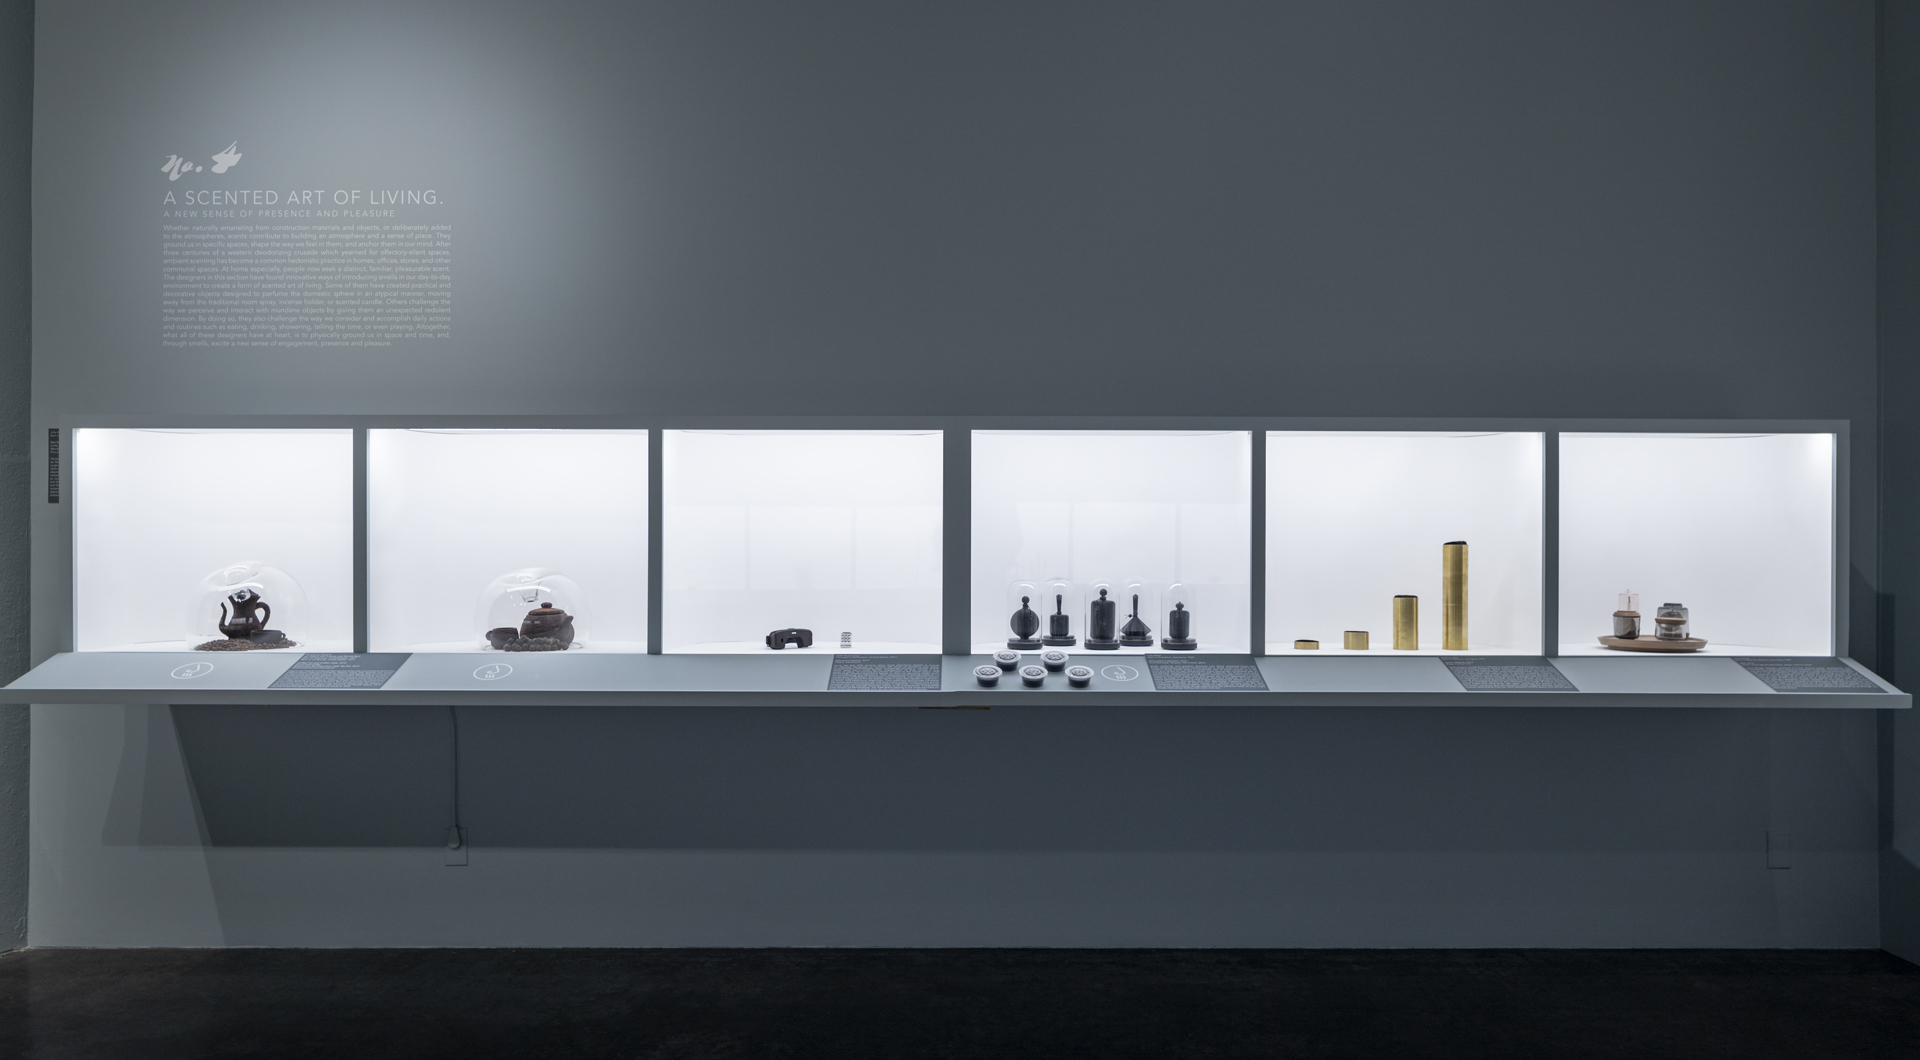 Exhibition photo glass cases and design objects